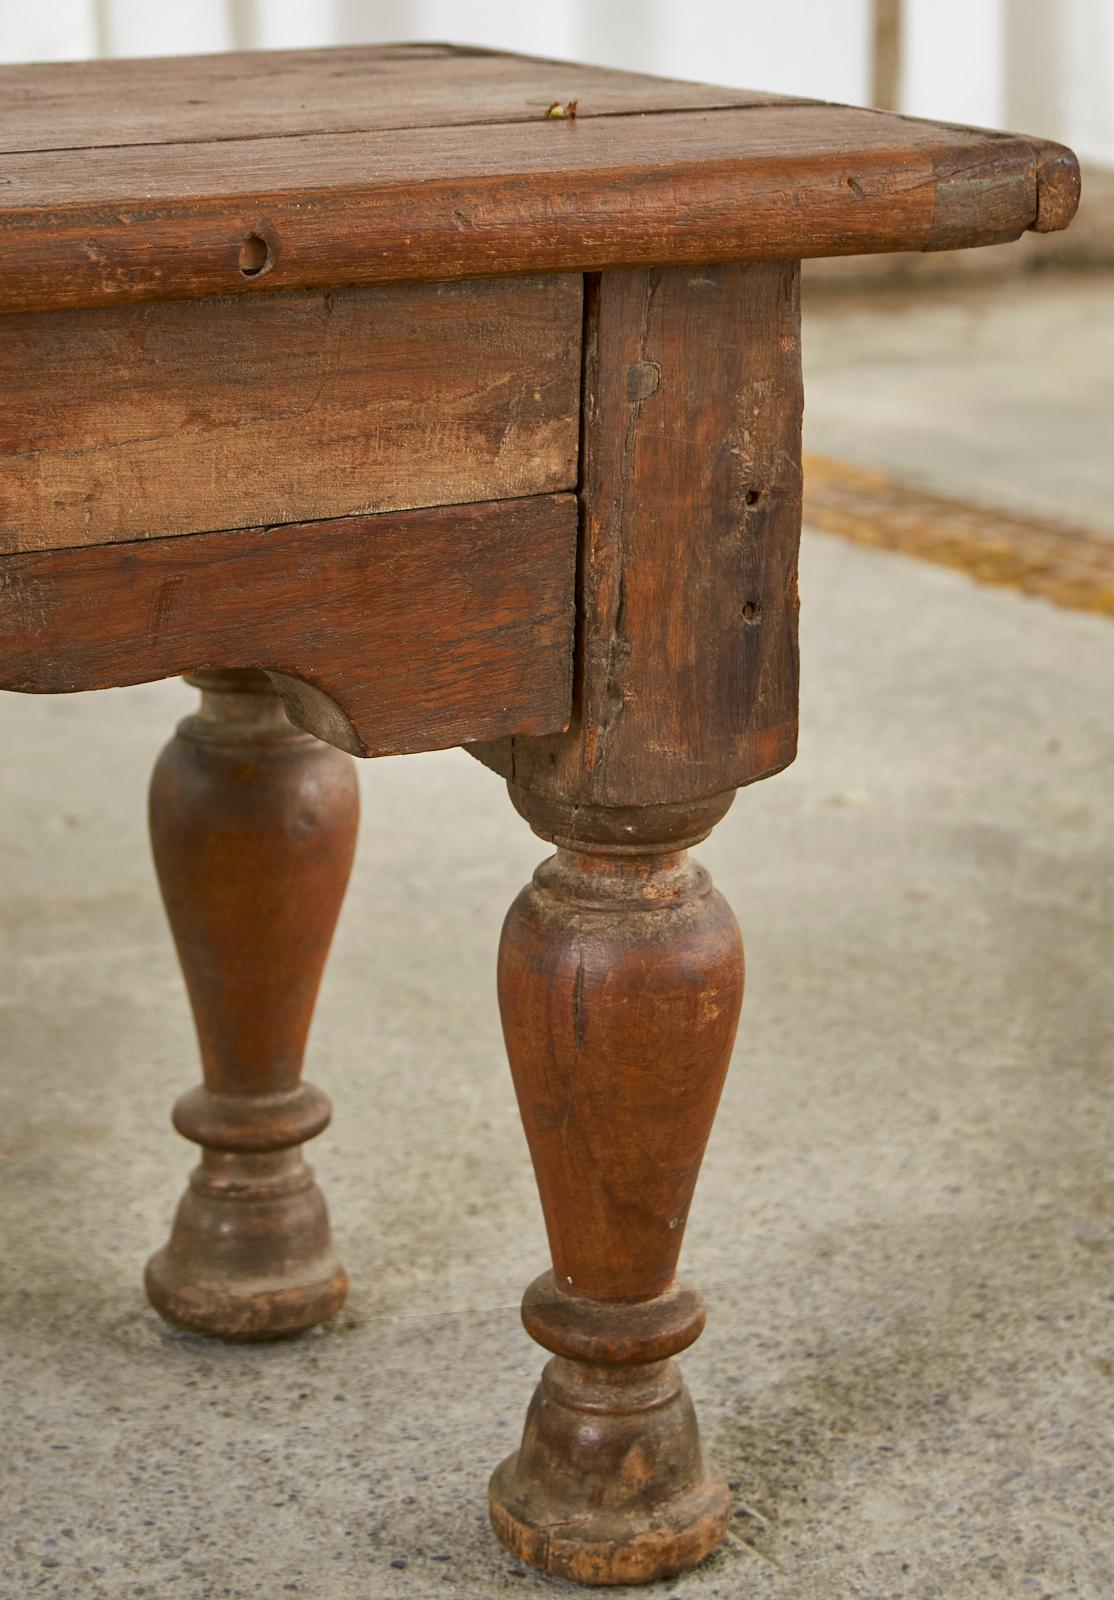 19th Century British Colonial Hardwood Low Table or Bench 14